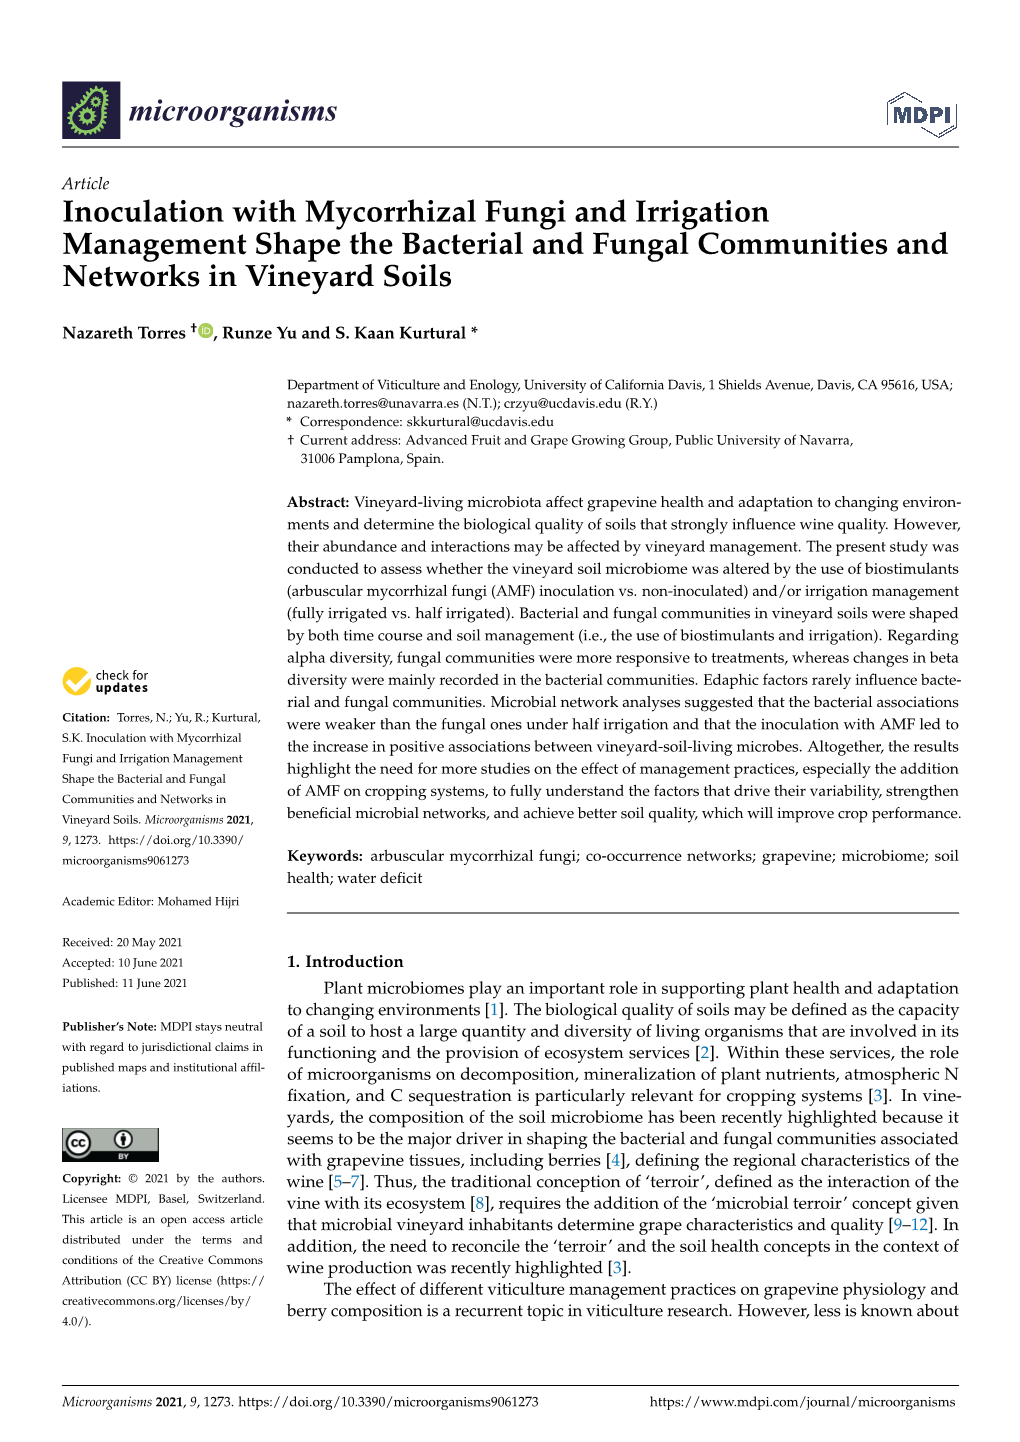 Inoculation with Mycorrhizal Fungi and Irrigation Management Shape the Bacterial and Fungal Communities and Networks in Vineyard Soils